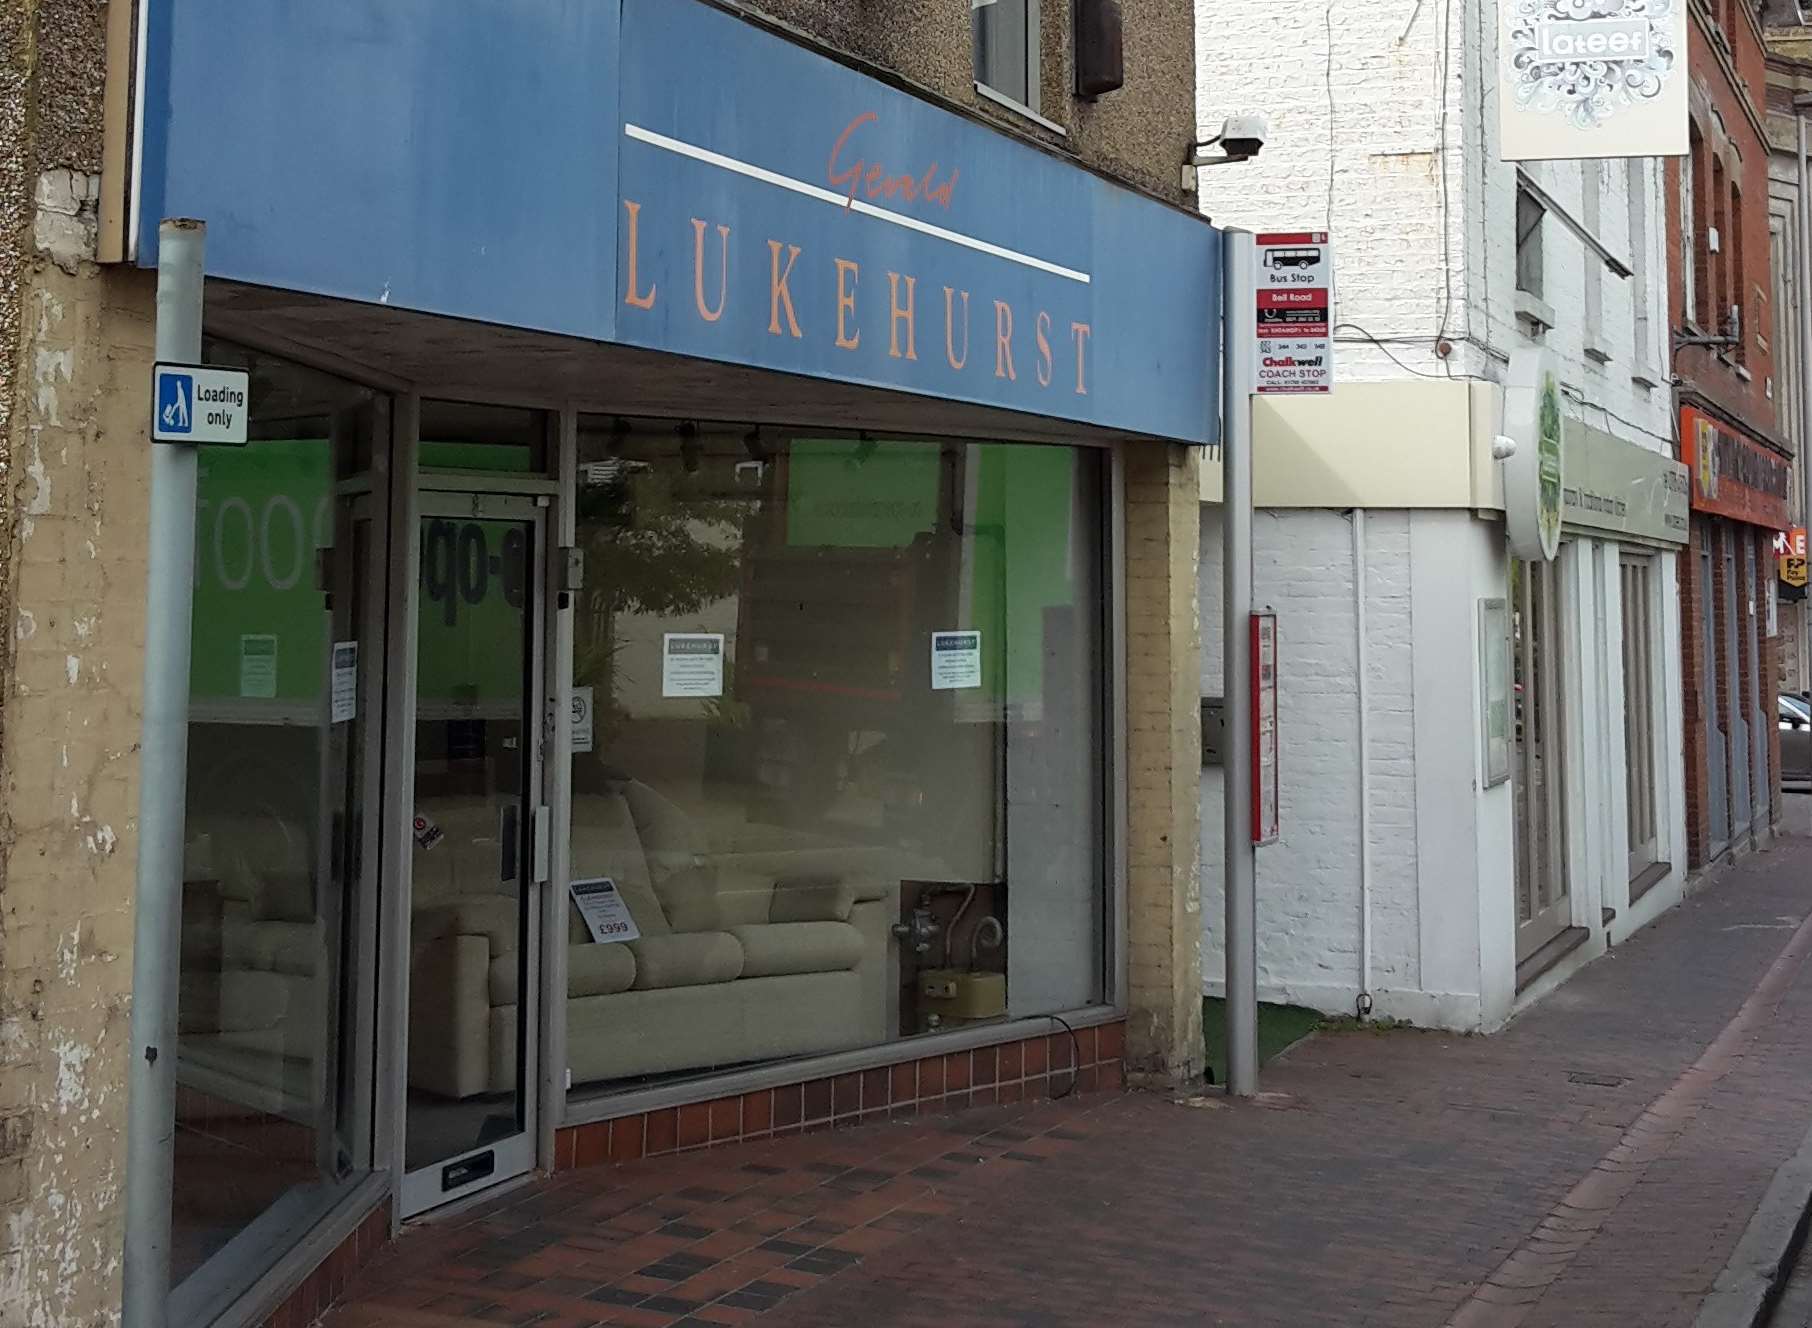 The former Gerald Lukehurst shop is being sold at auction